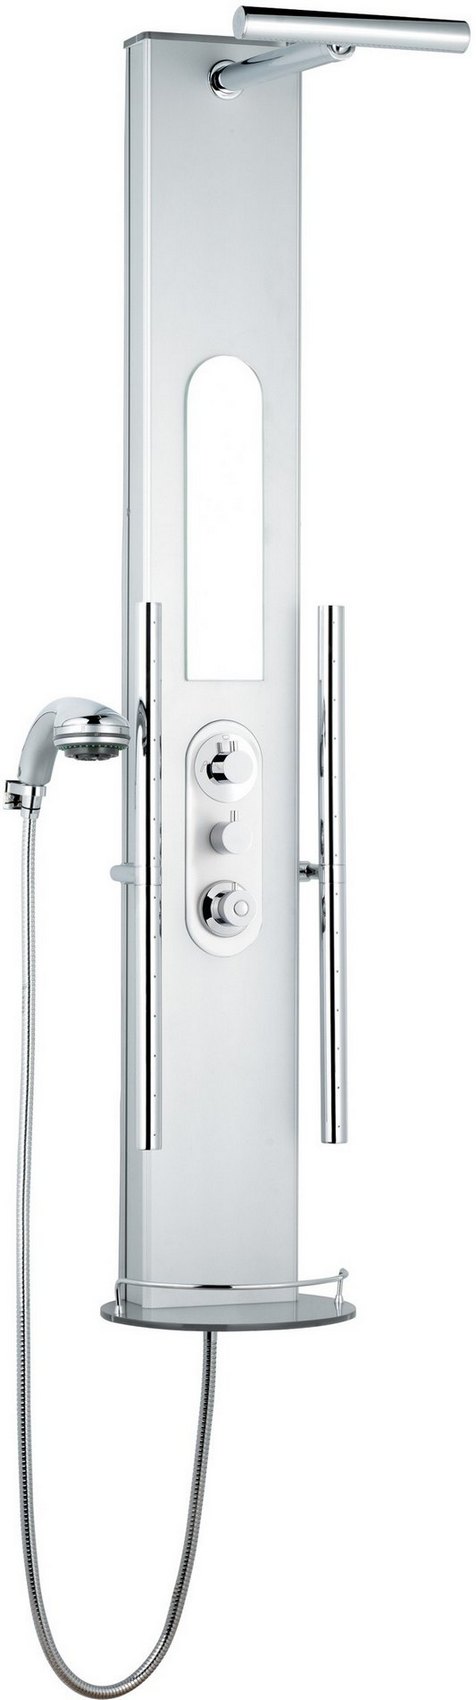 Larger image of Hudson Reed Dream Shower Rio